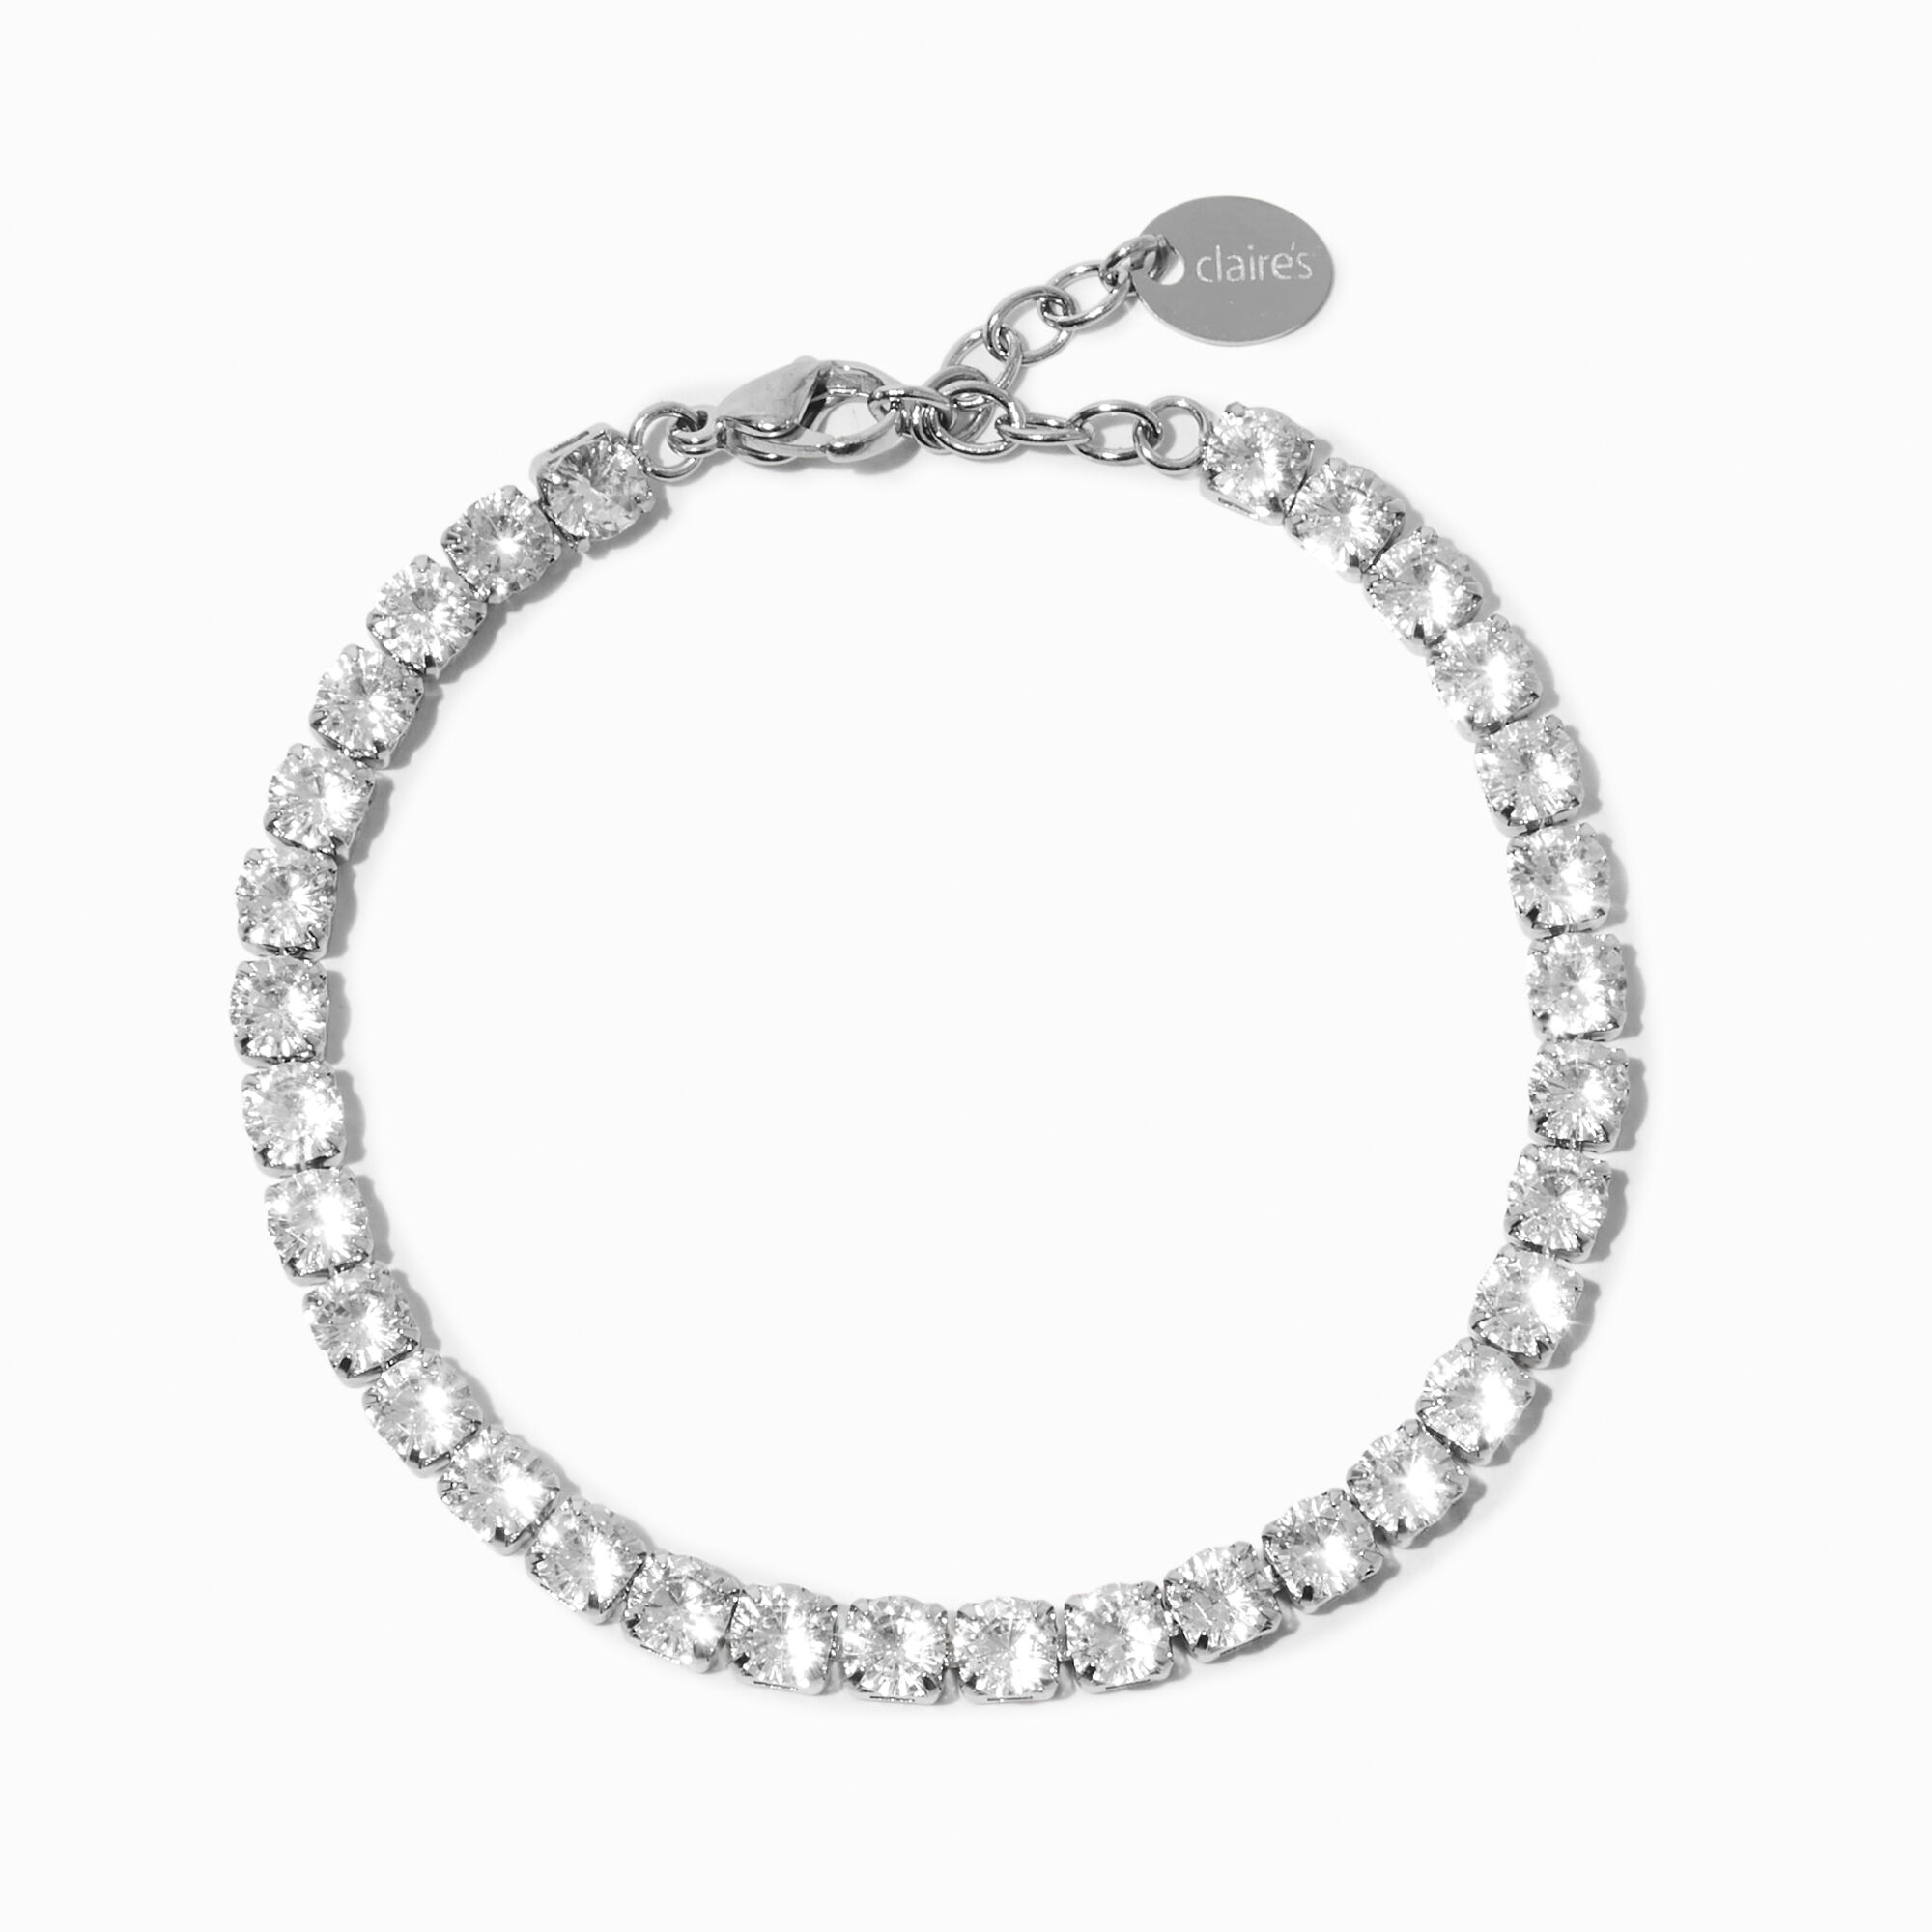 View Claires Tone Stainless Steel Cubic Zirconia Tennis Bracelet Silver information